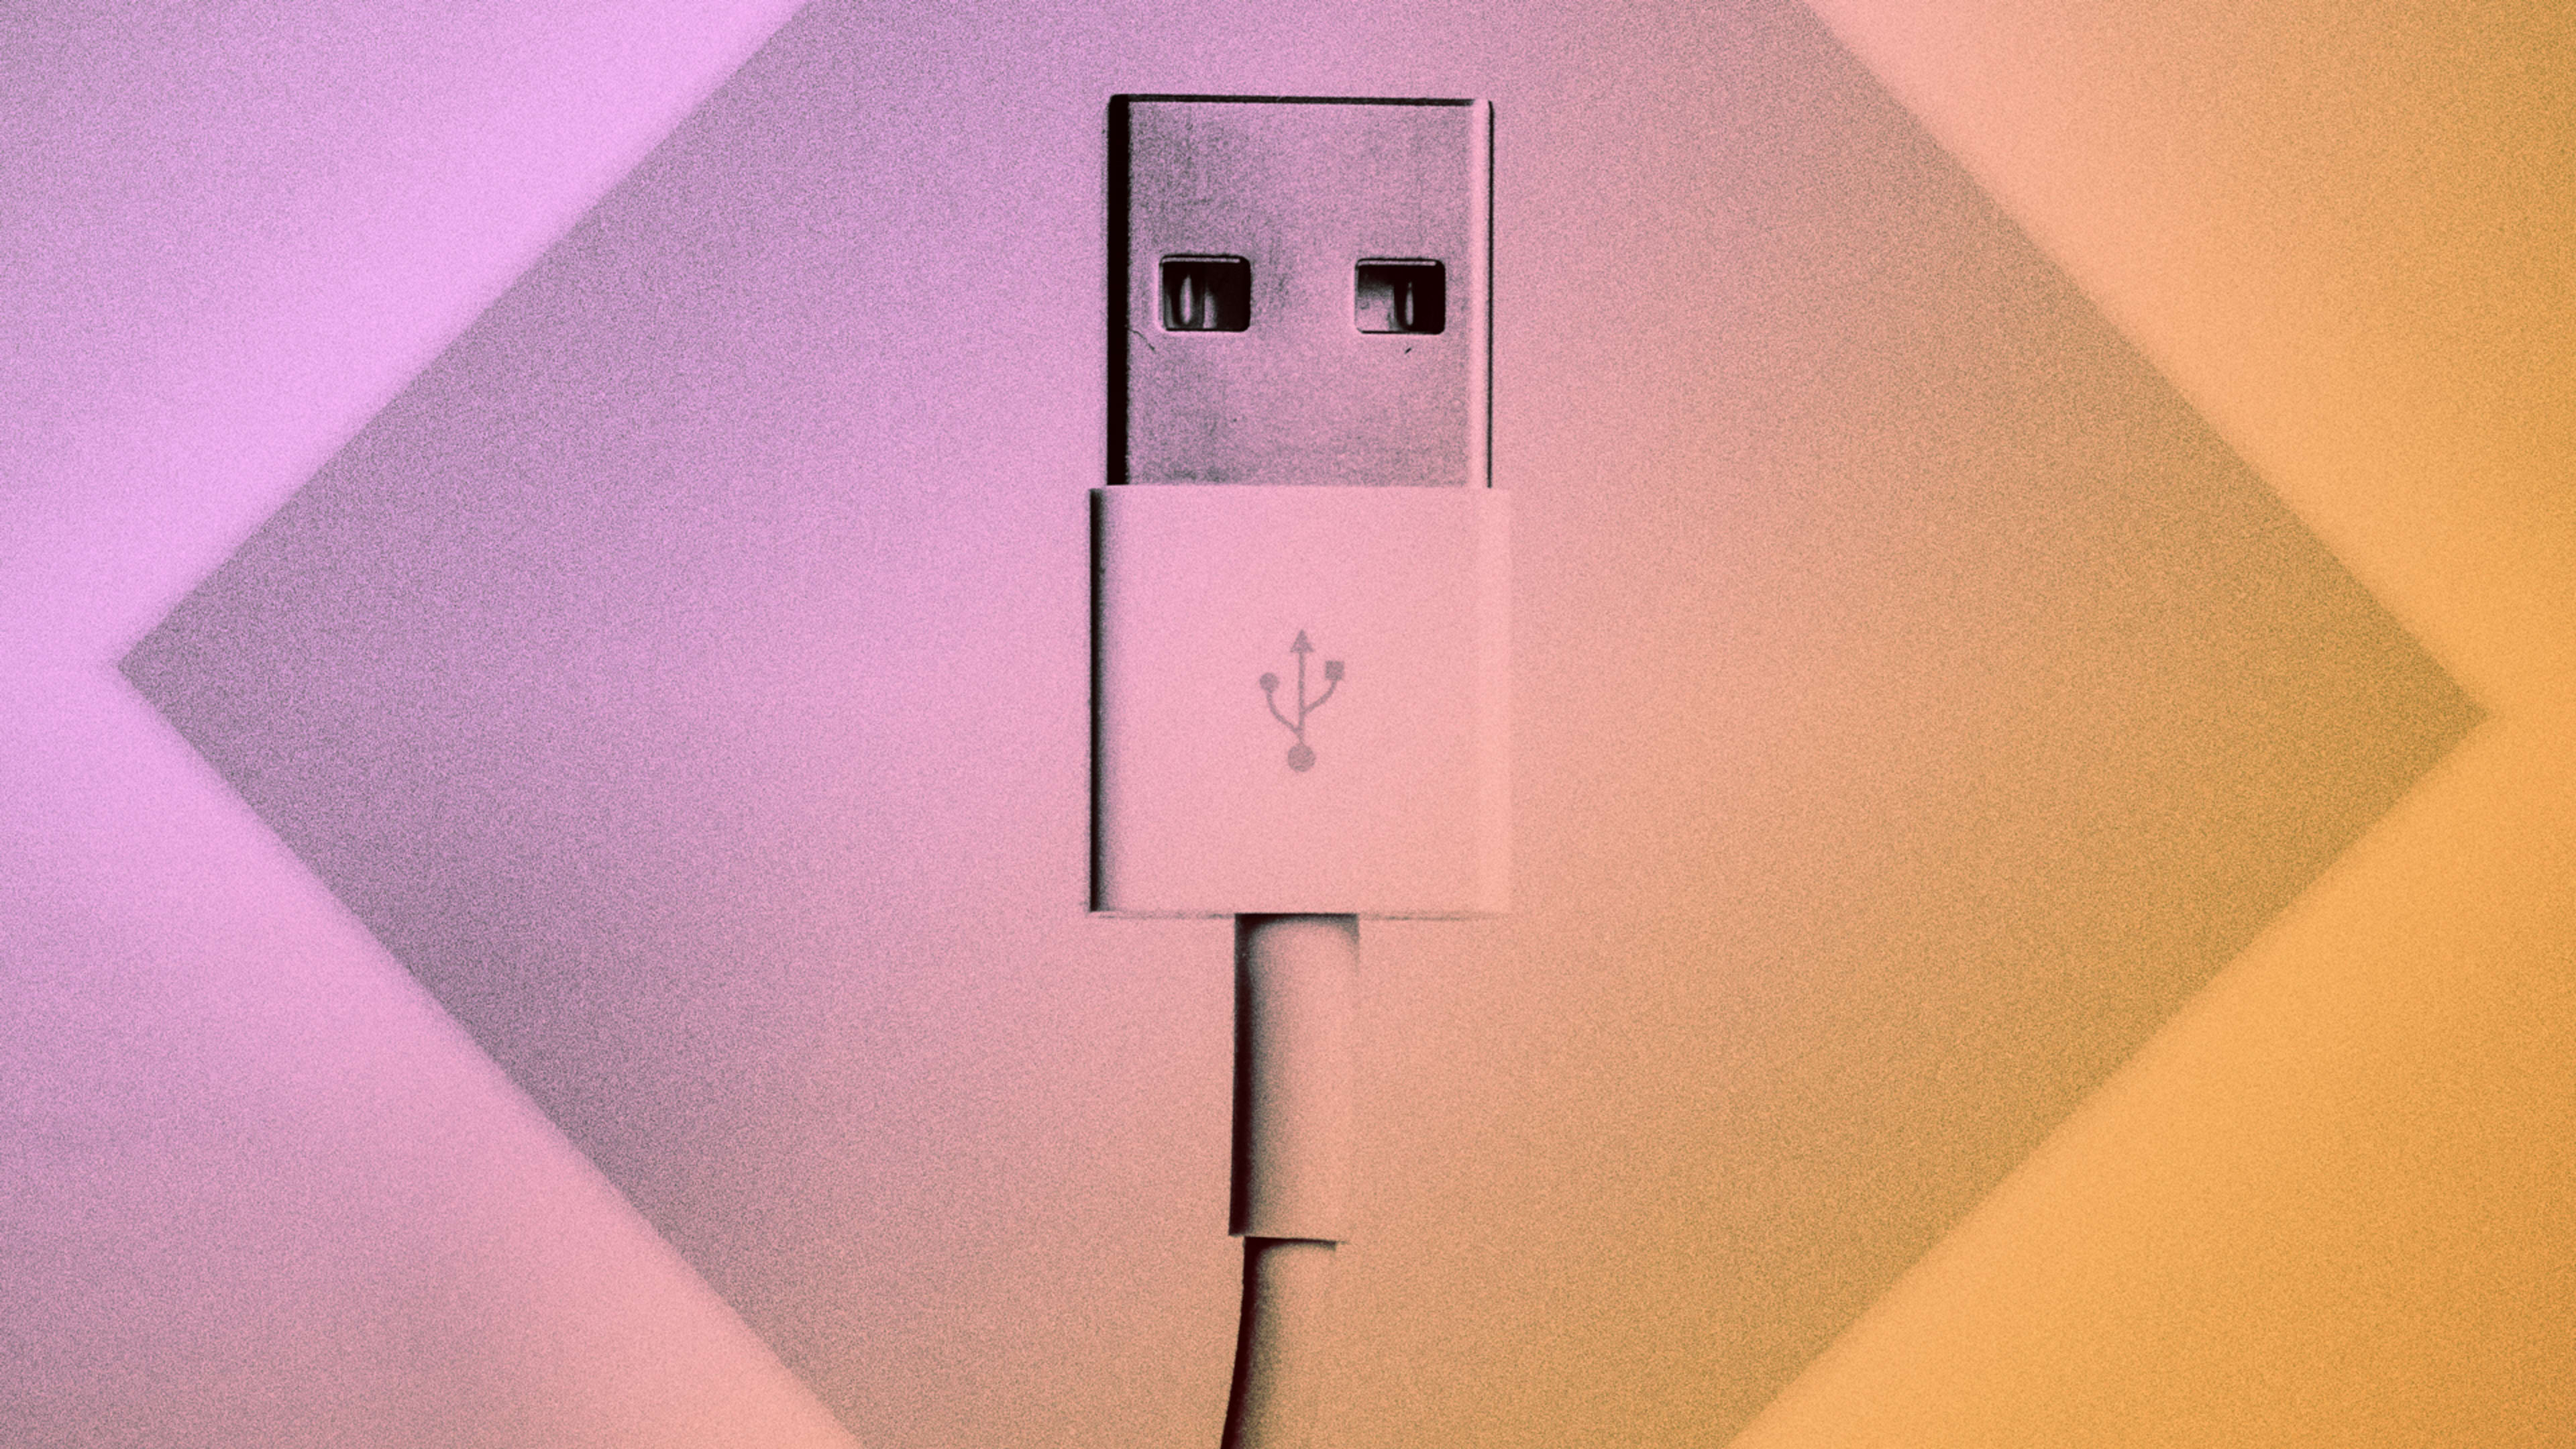 How to stop public USB ports from hacking your phone